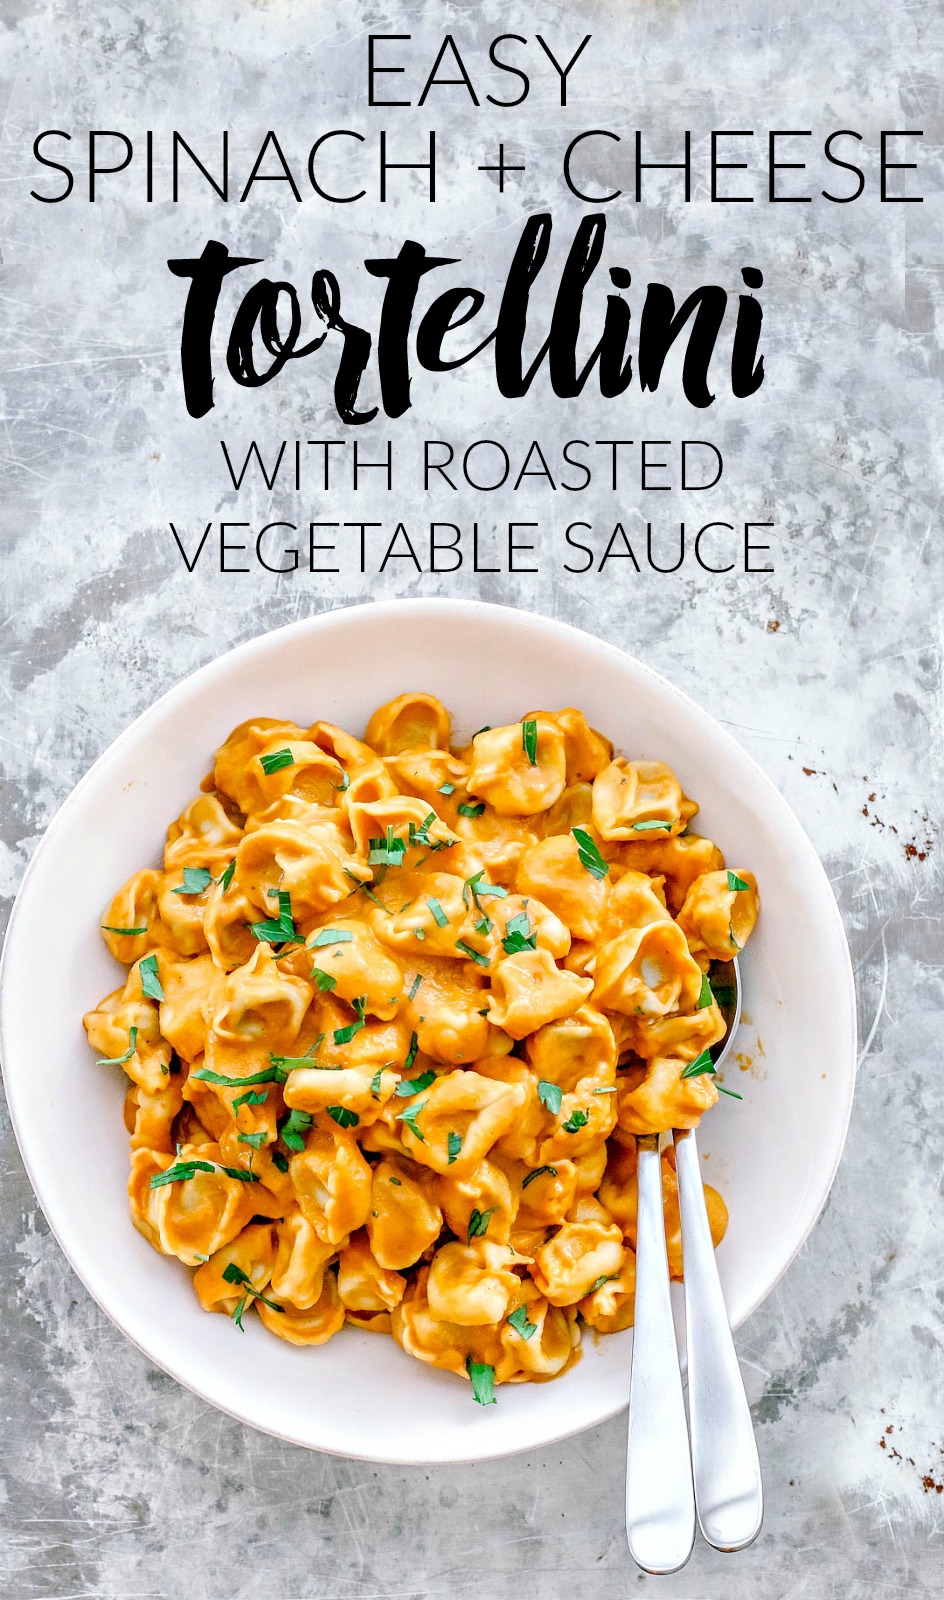 Spinach and Cheese Tortellini With Roasted Vegetable Sauce | Killing Thyme